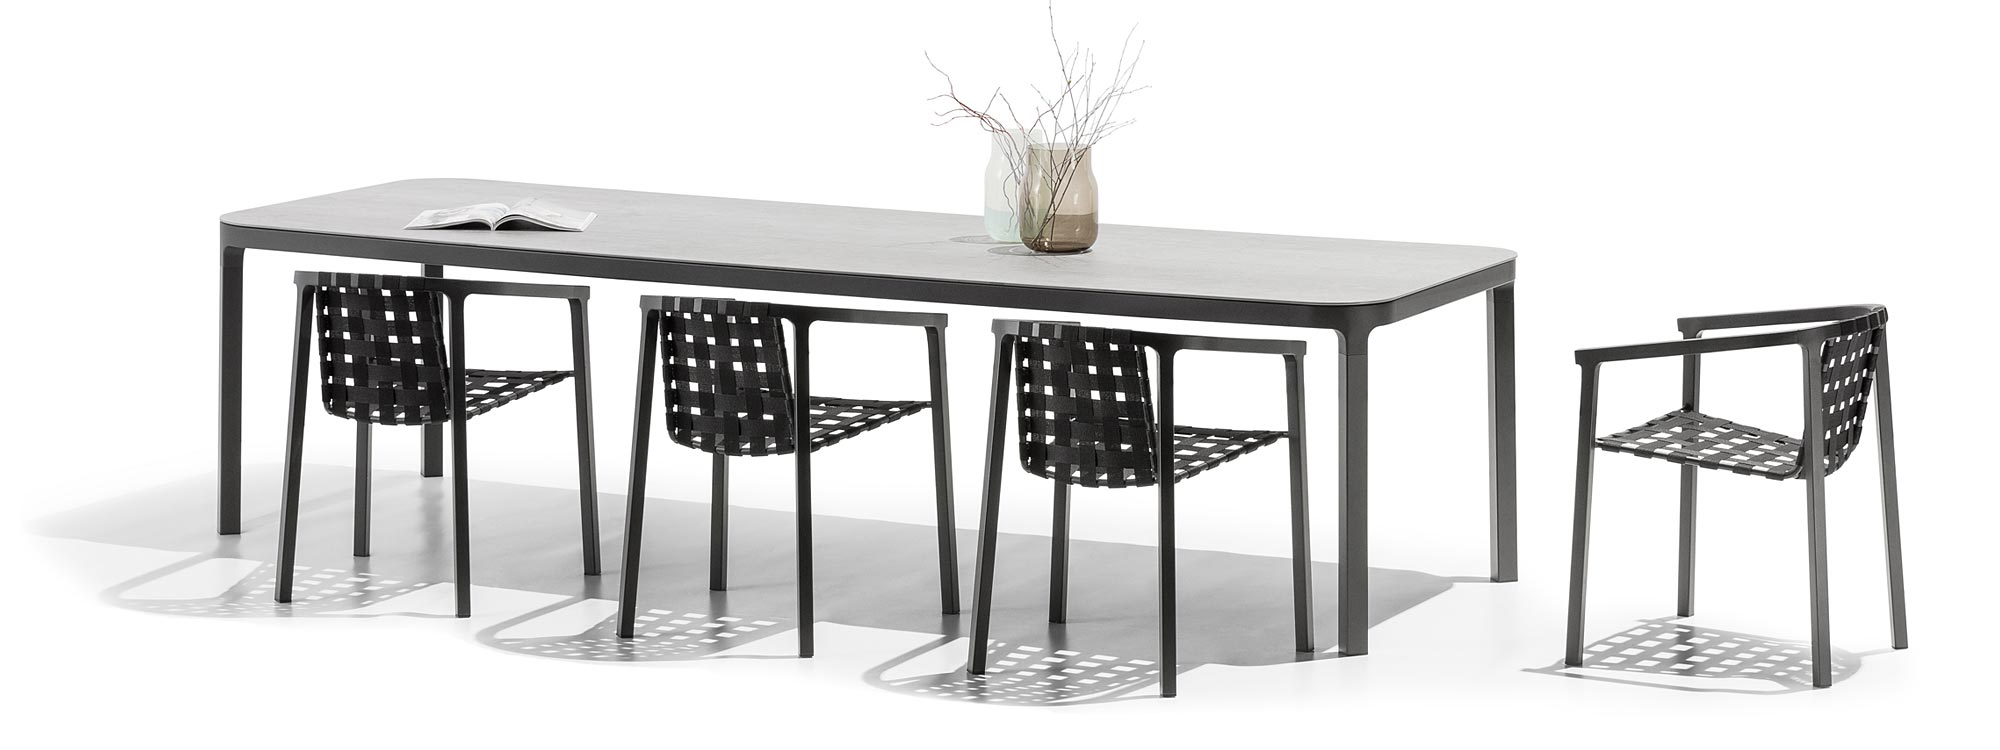 Duct modern garden table and chairs in aluminium jpg